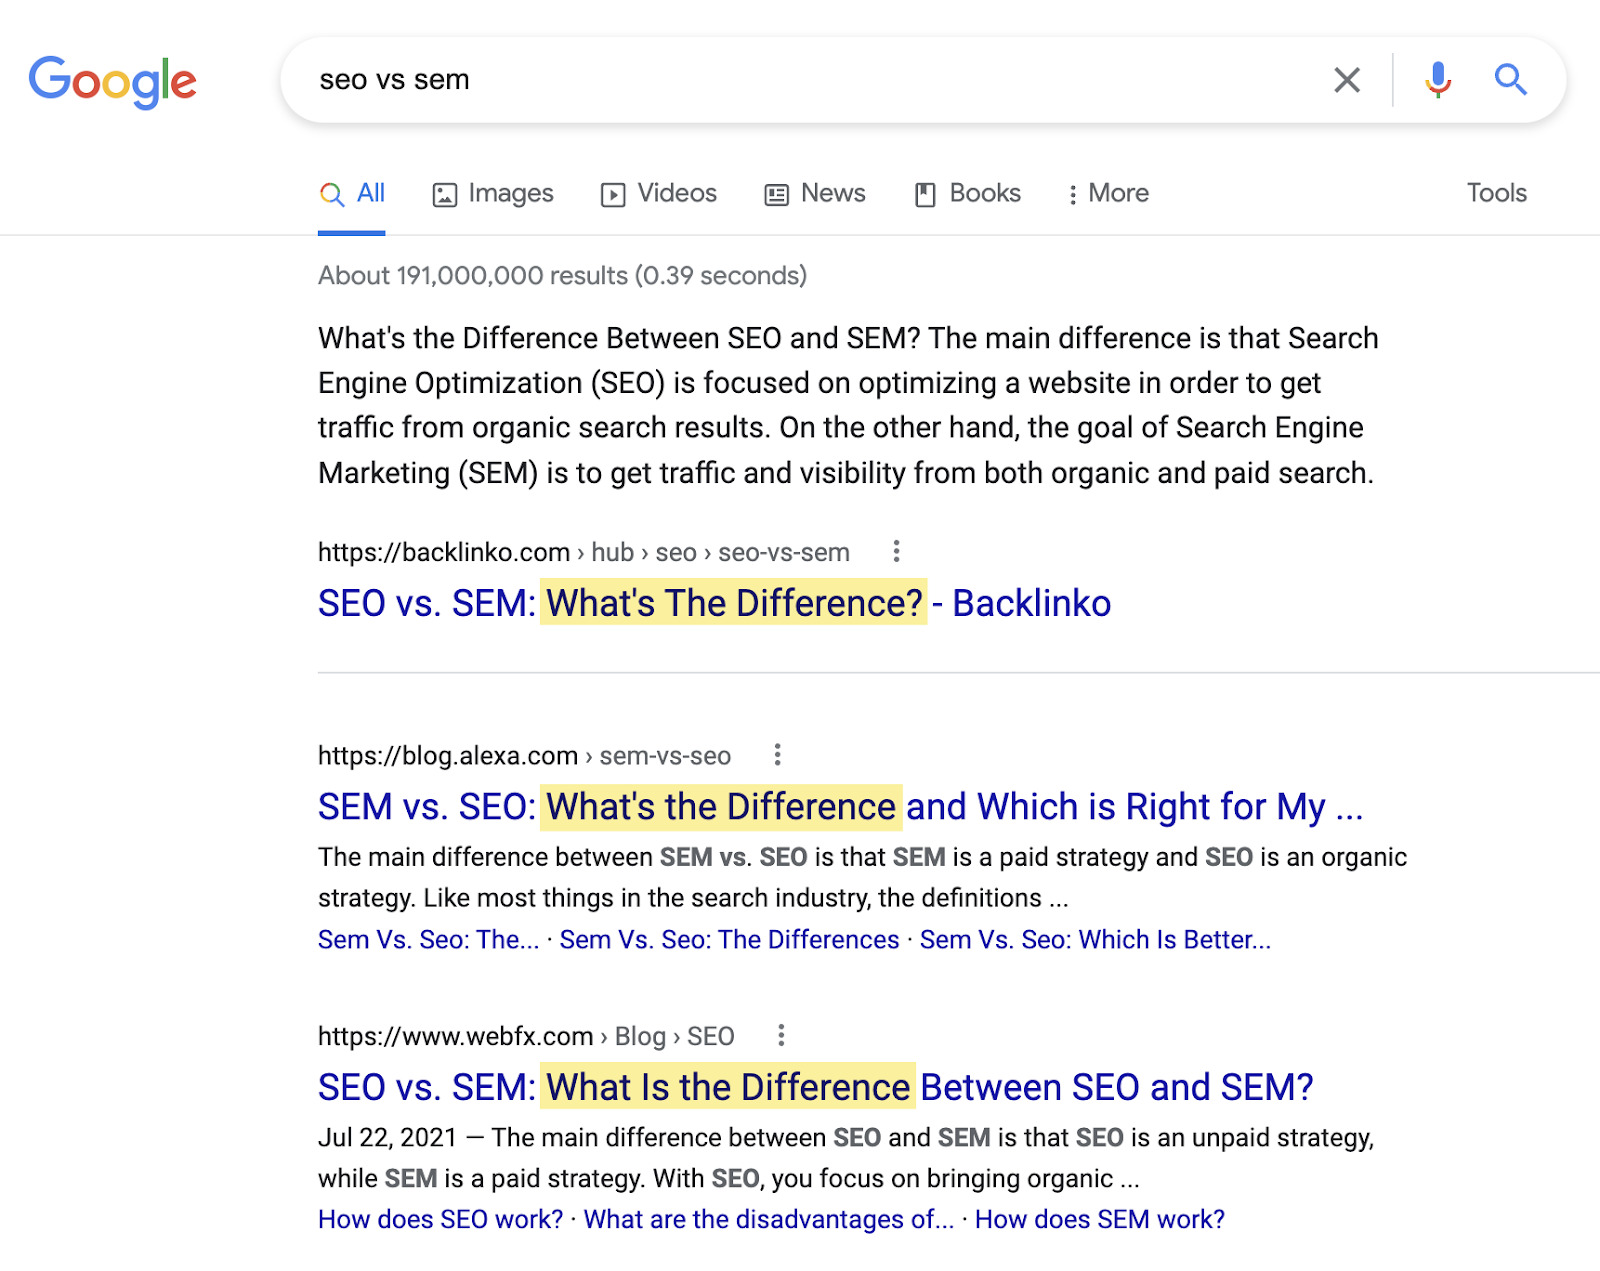 People searching for "seo vs sem" want to learn